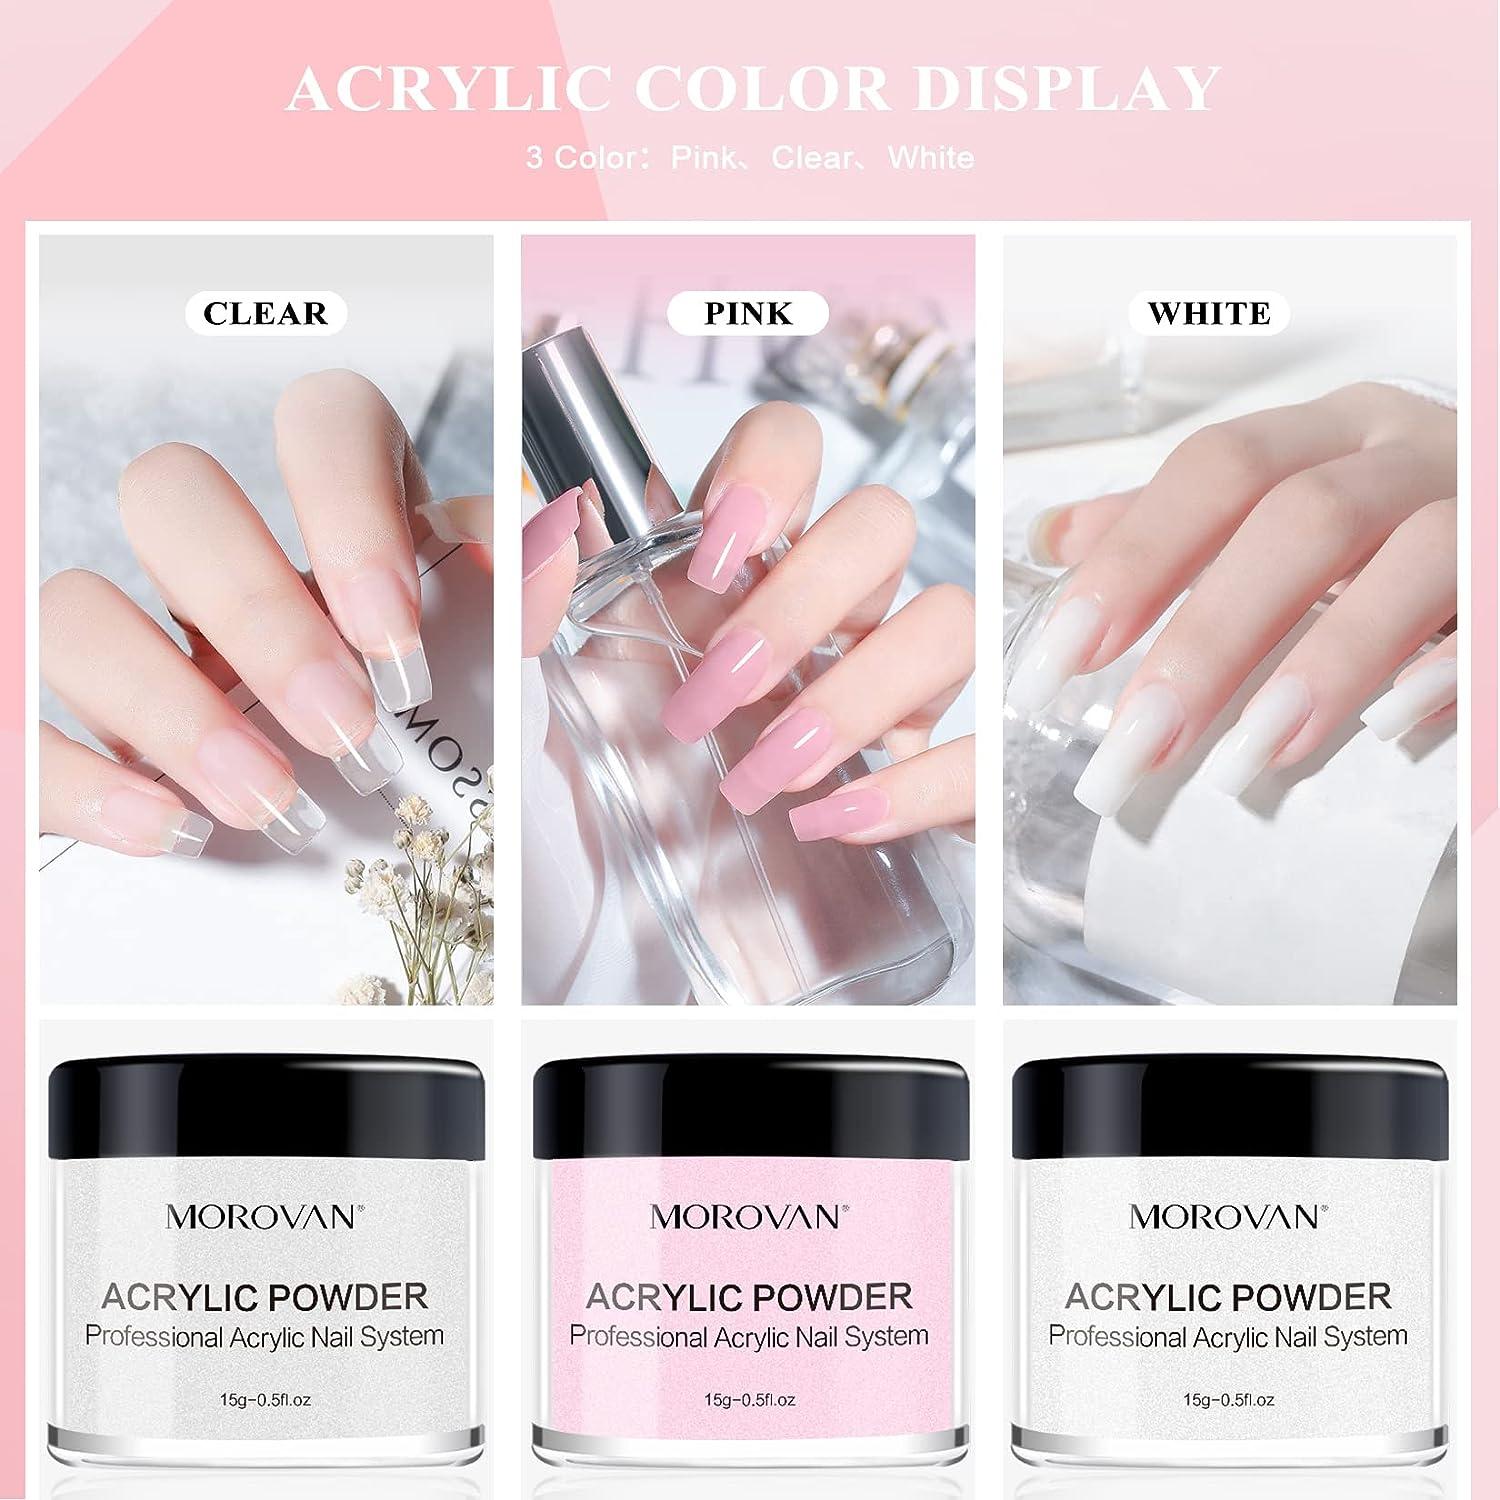 Morovan Acrylic Nail Kit Nails Kit Acrylic Set With Everything For  Beginners Clear White Pink Acrylic Nail Powder Set Nails Kit Acrylic Set  With 12